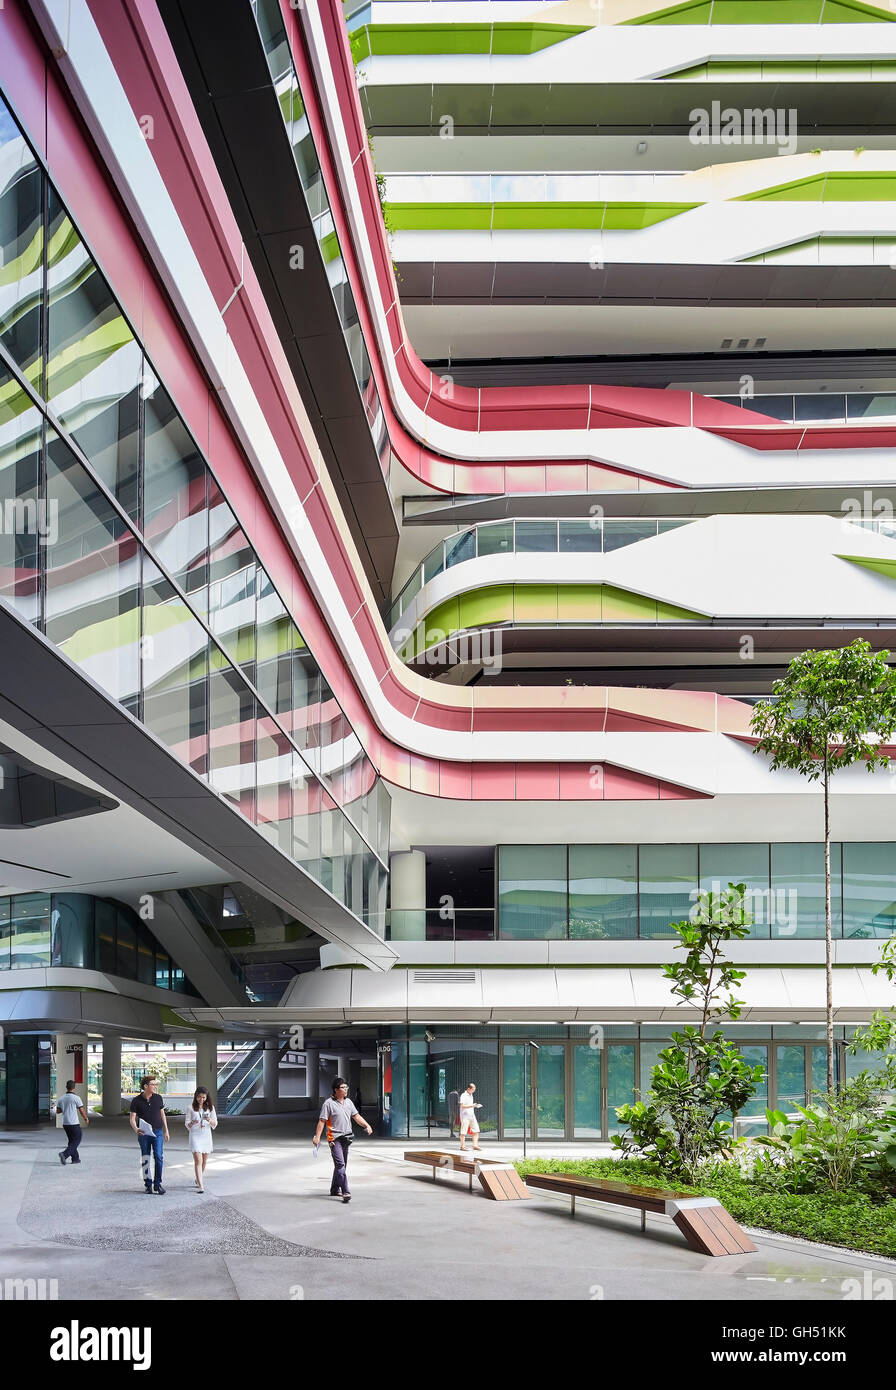 Glazing and purple and green cladding of exterior facade. Singapore University of Technology and Design, Singapore, Singapore. Architect: UNStudio, 2015. Stock Photo